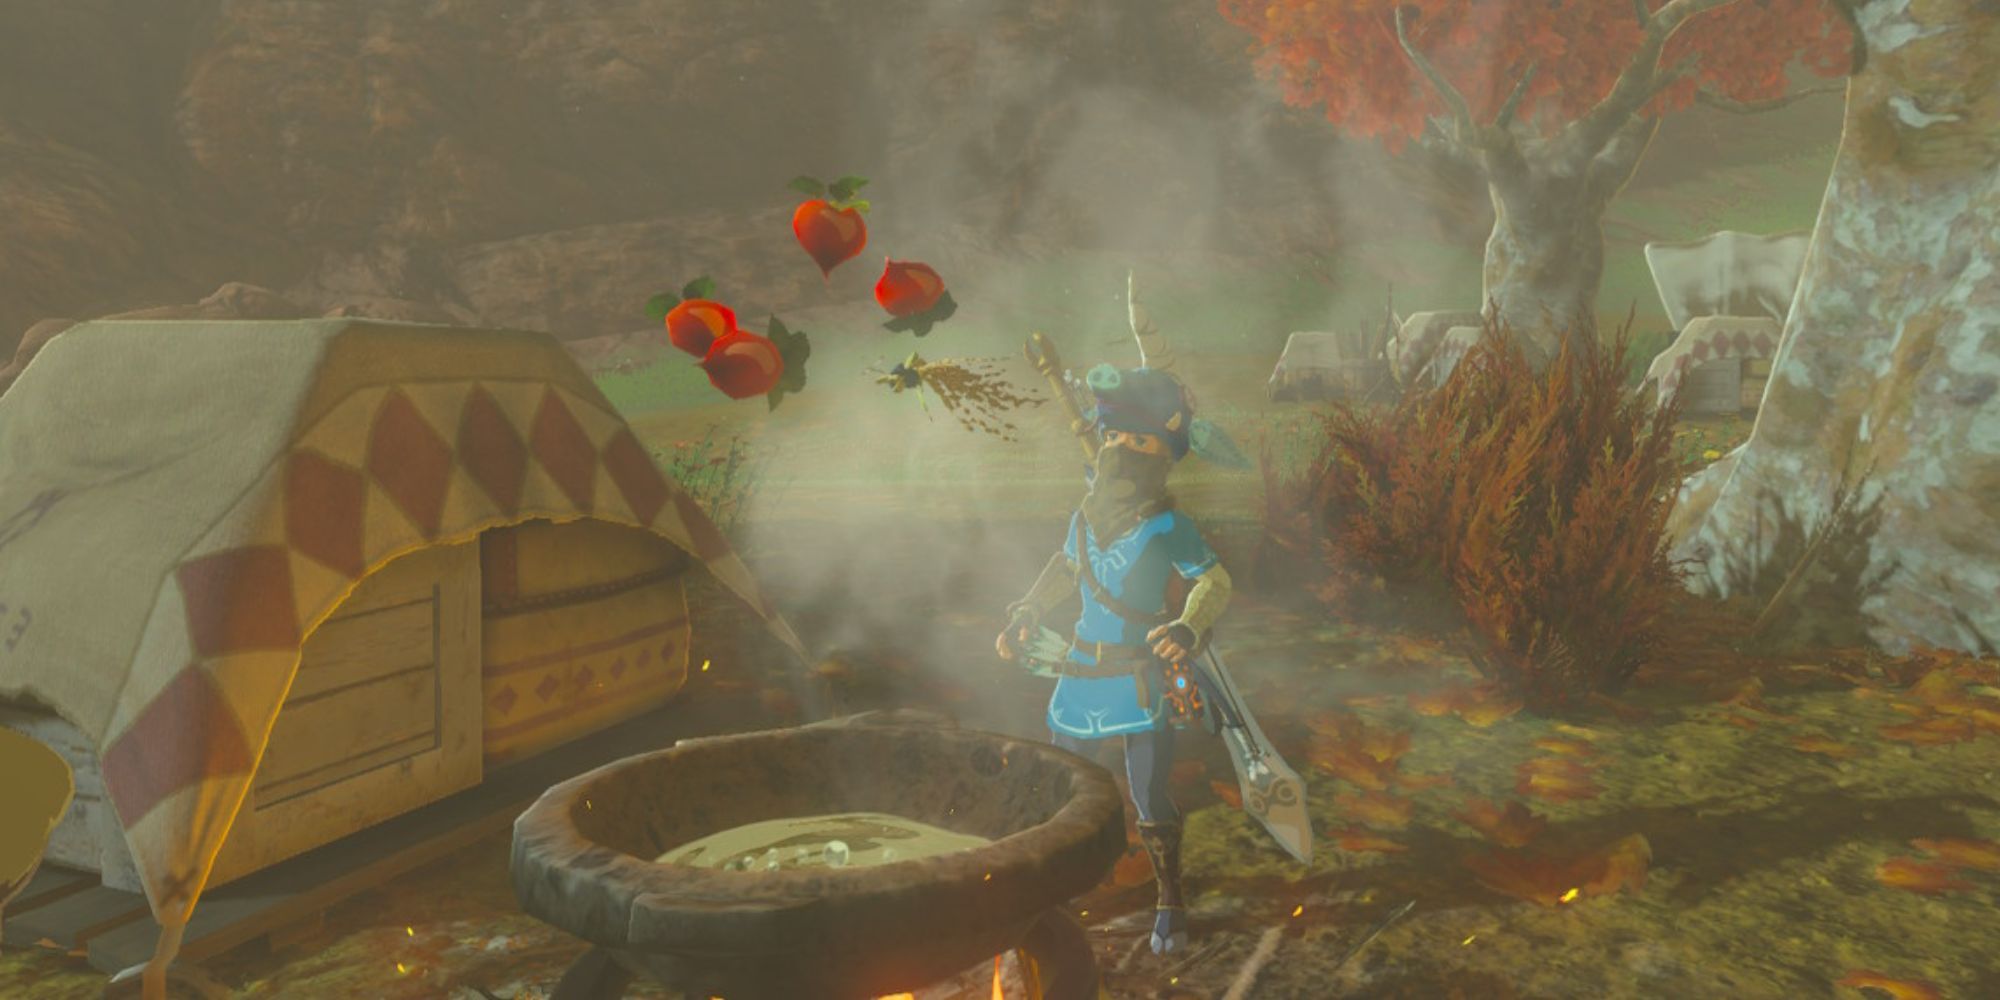 Link watches food fly in the air while cooking outside a stable